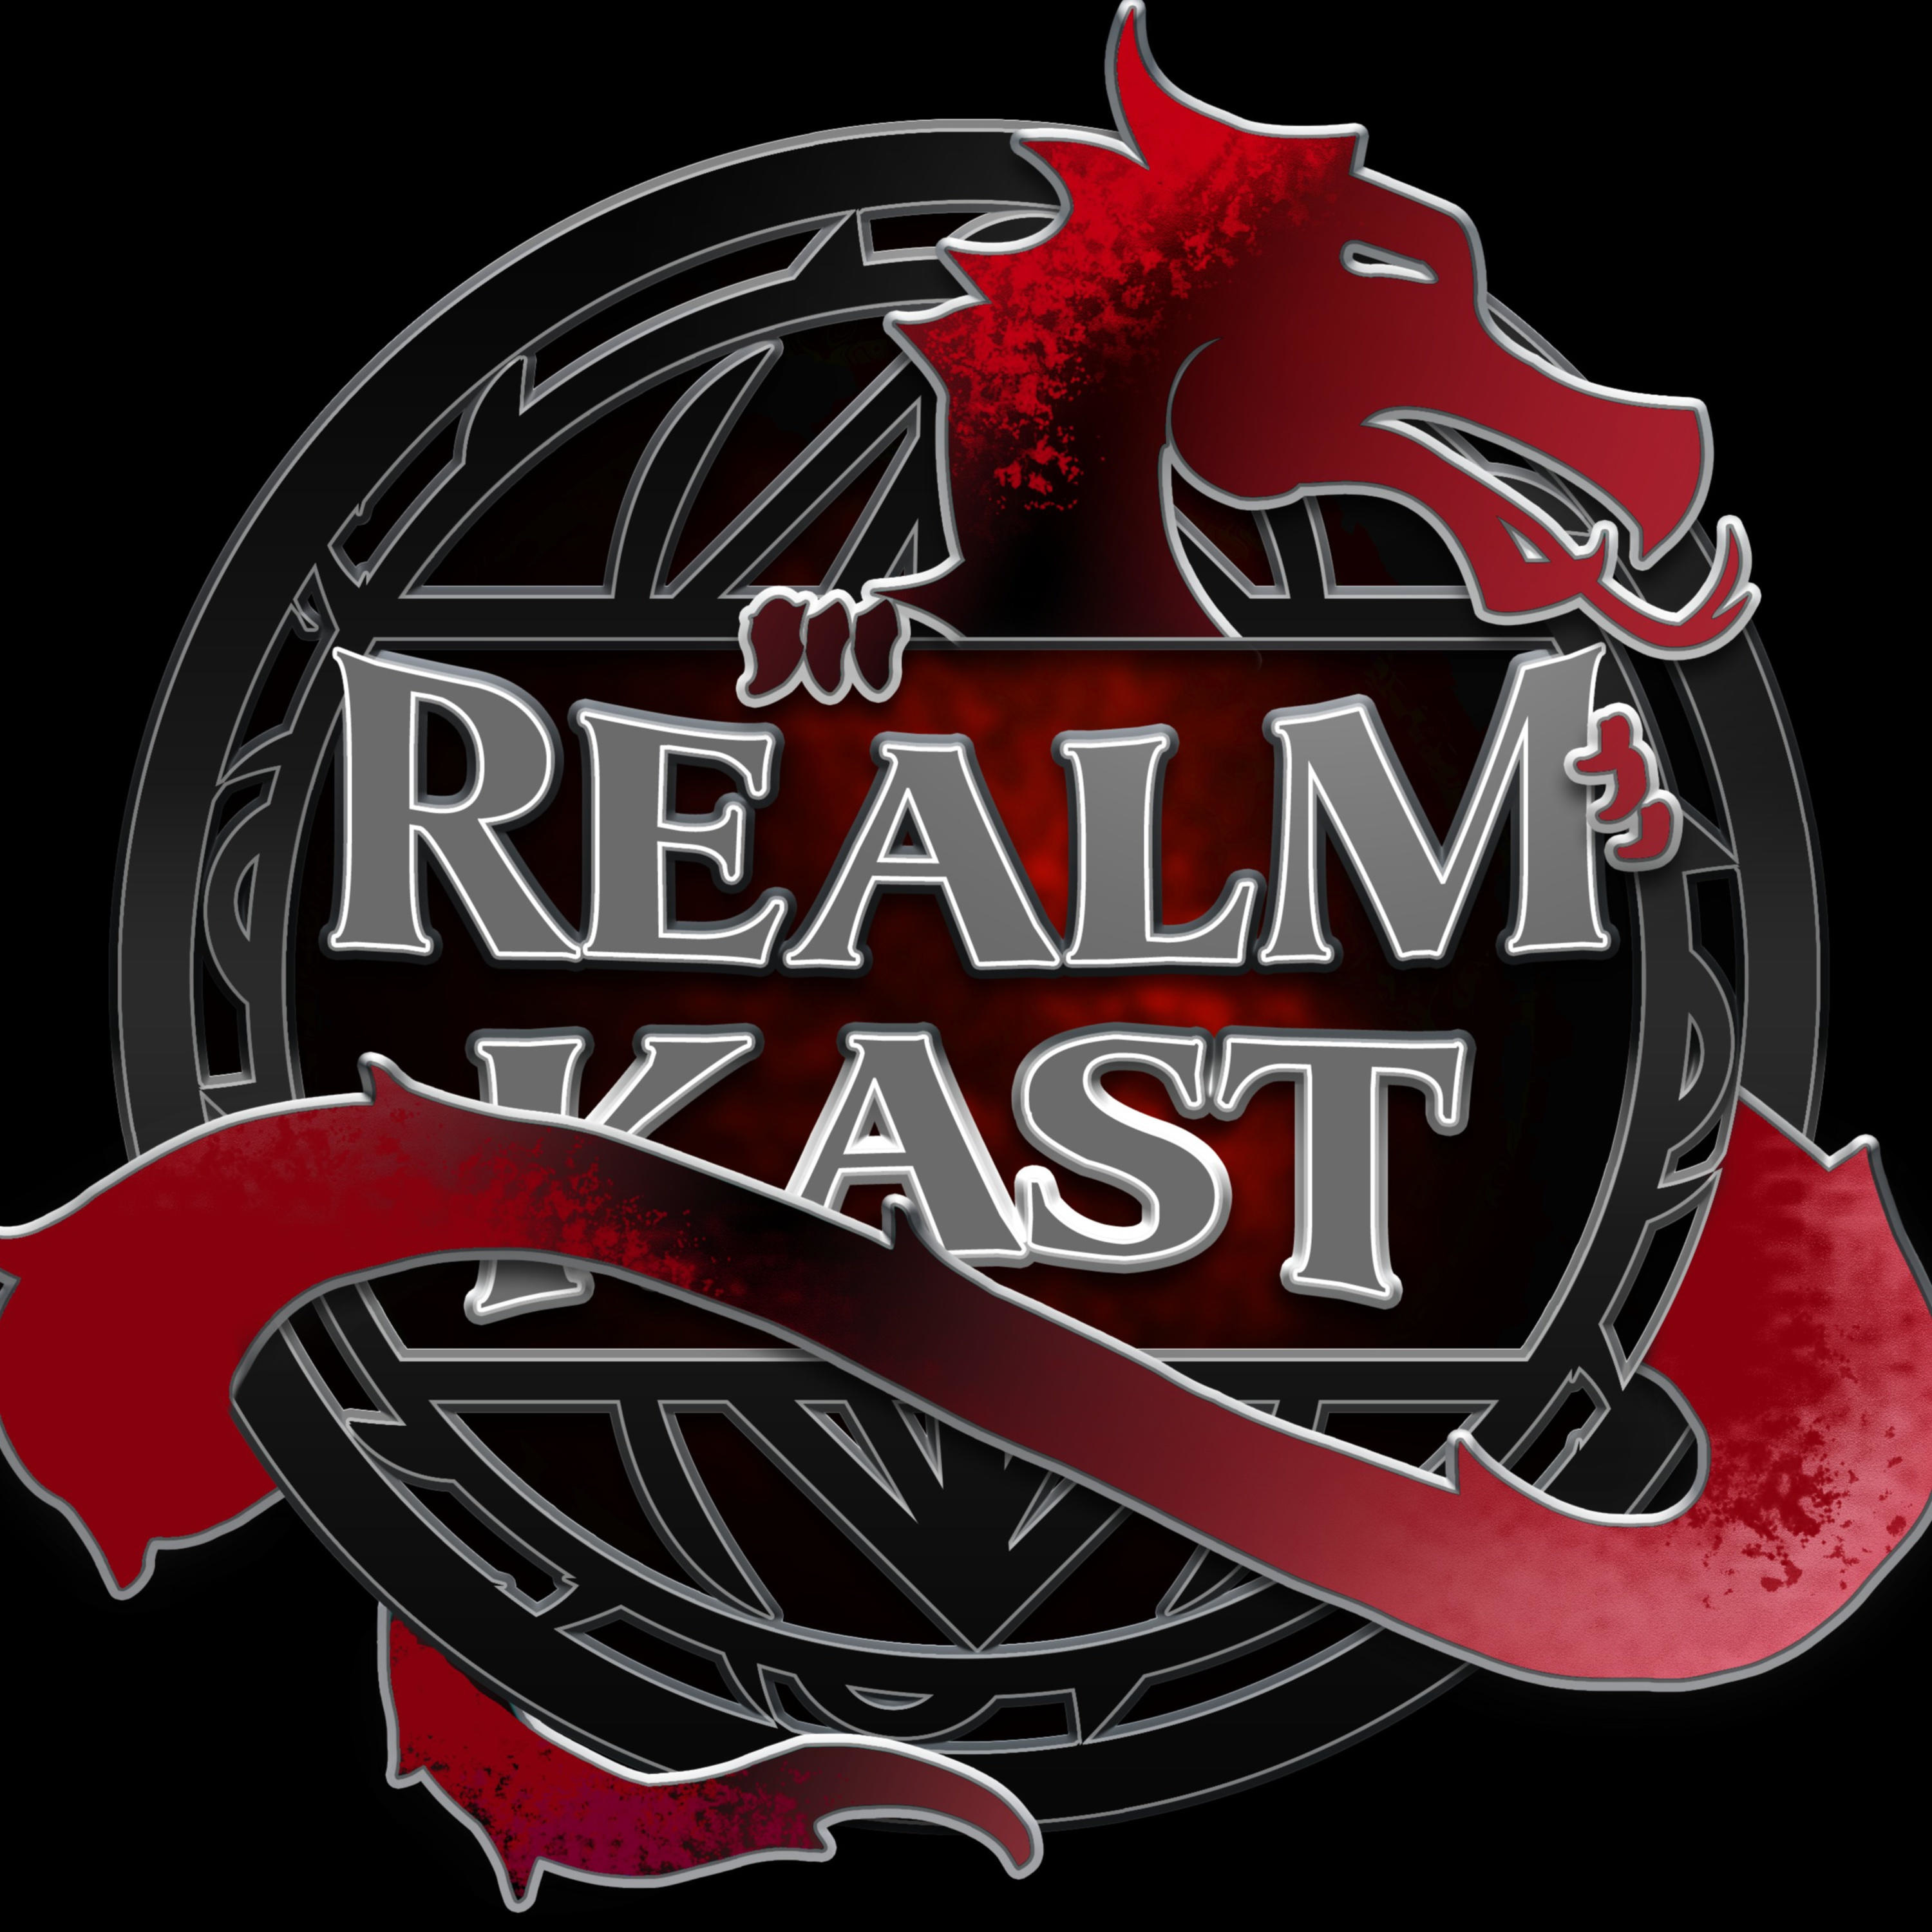 The Realm Kast